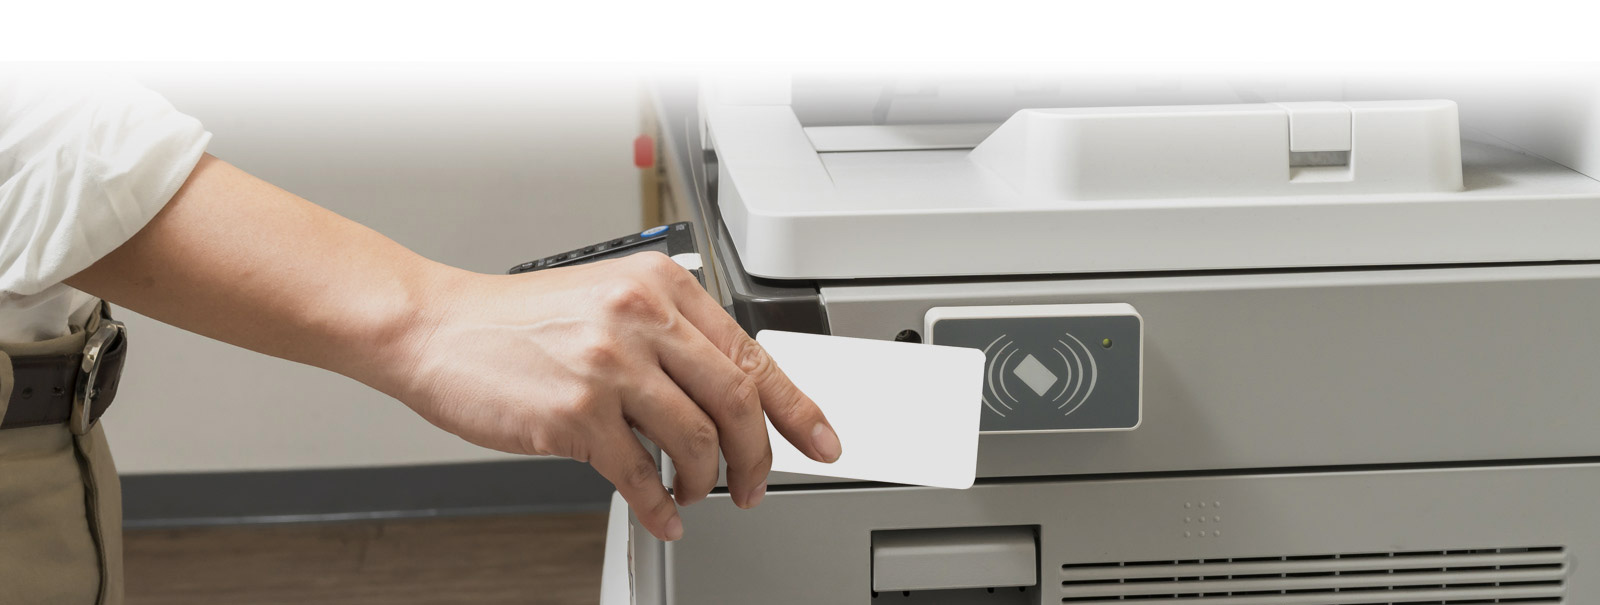 National distributor of card printers and accessories